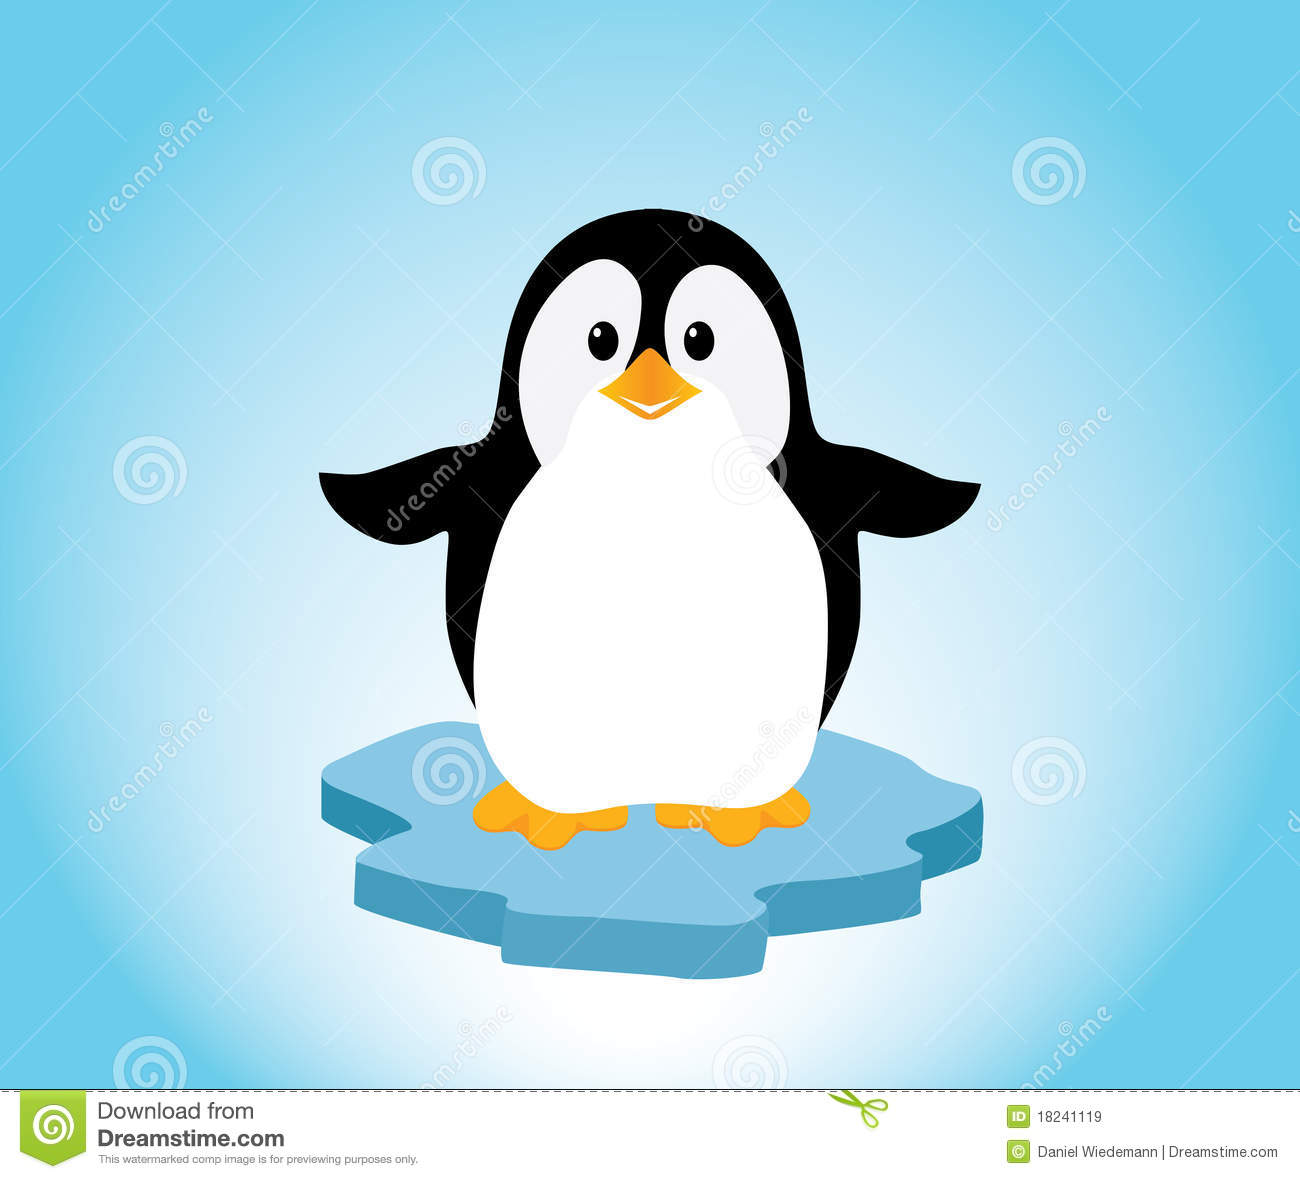 Penguin On Ice Royalty Free Stock Images   Image  18241119